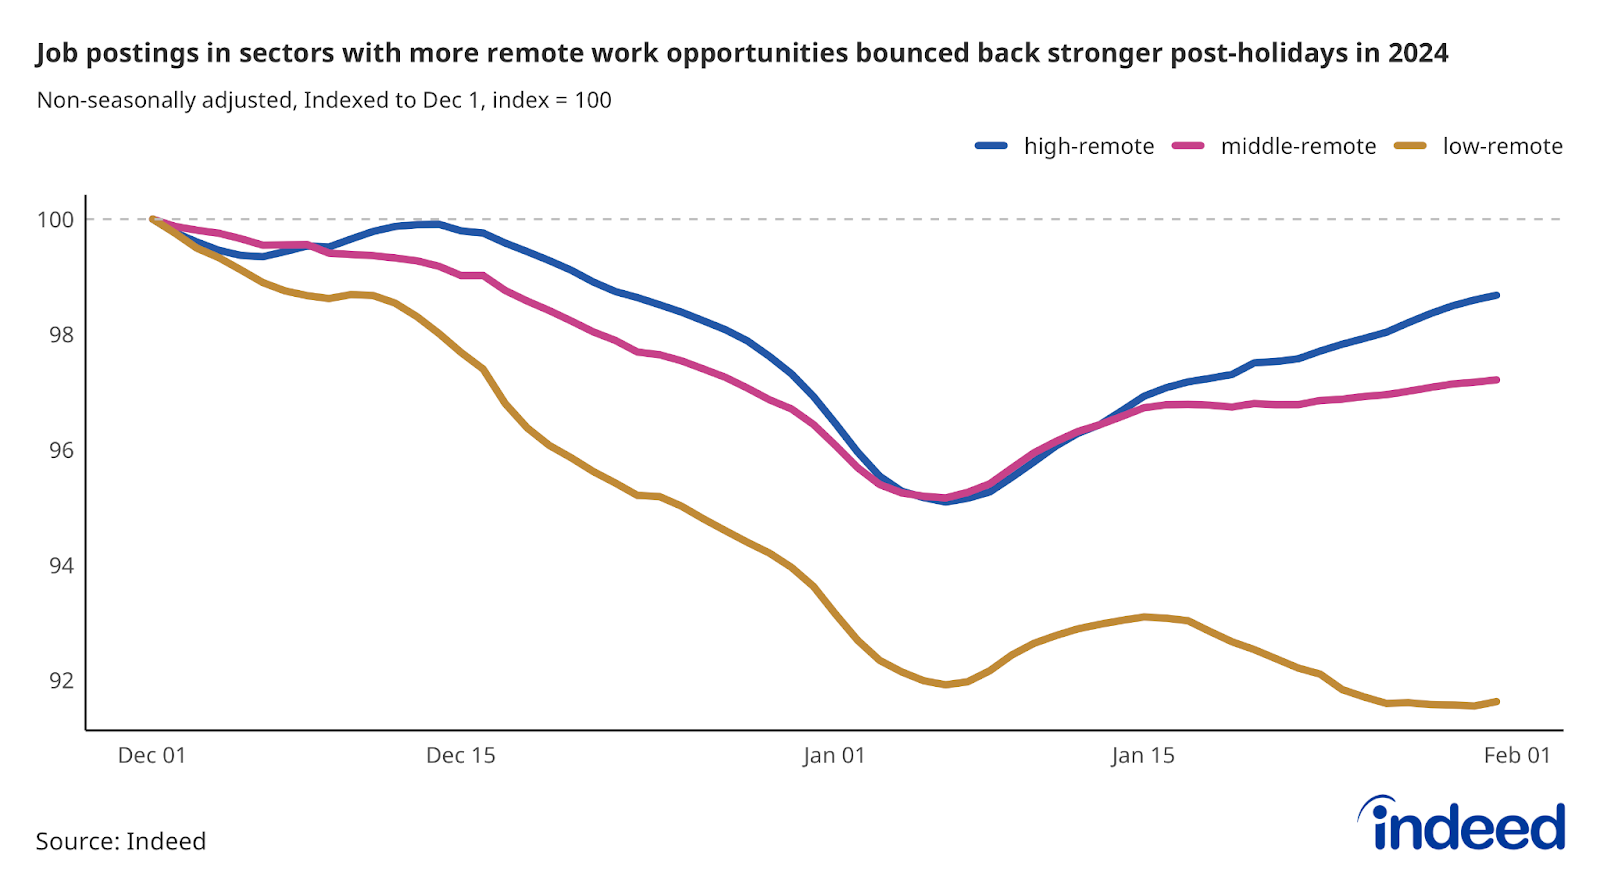  Line chart titled “Job postings in sectors with more remote work opportunities bounced back stronger post-holidays in 2024.” With a vertical axis ranging from 92 to 100, Indeed tracked job postings along a horizontal axis running from December to February, with different colored lines representing high-, middle-, and low-remote postings.